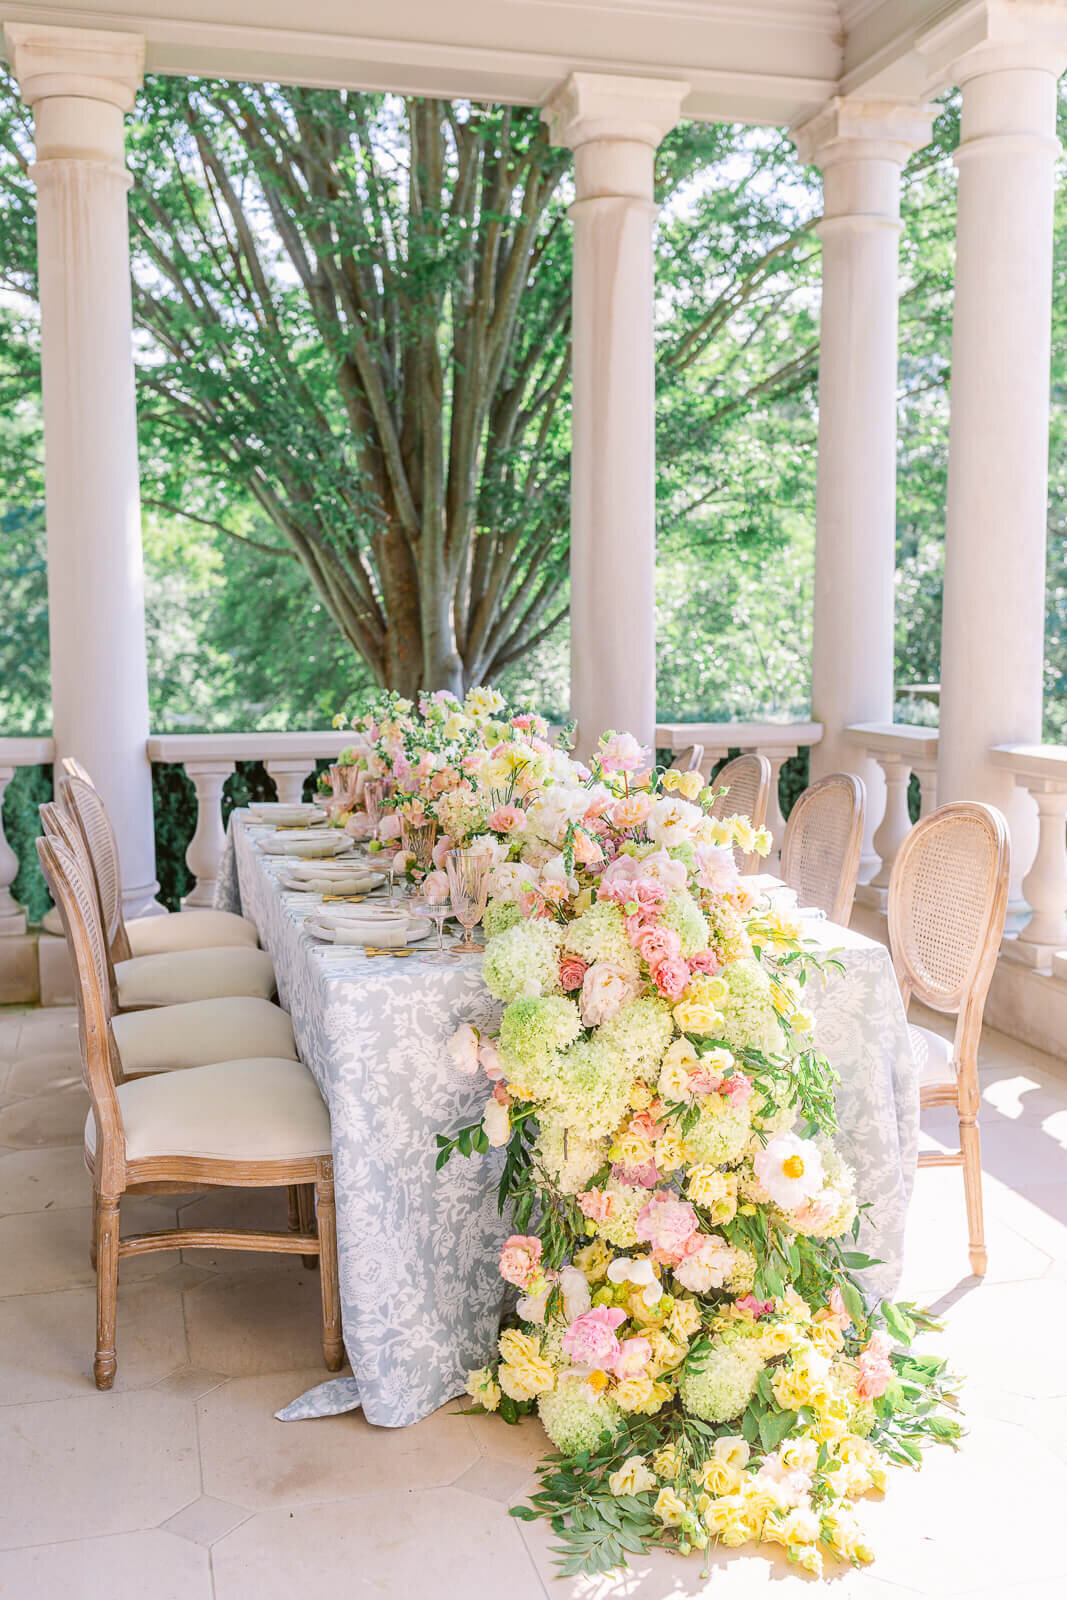 Tbalescape and florals at Great Marsh Estate in the summer.